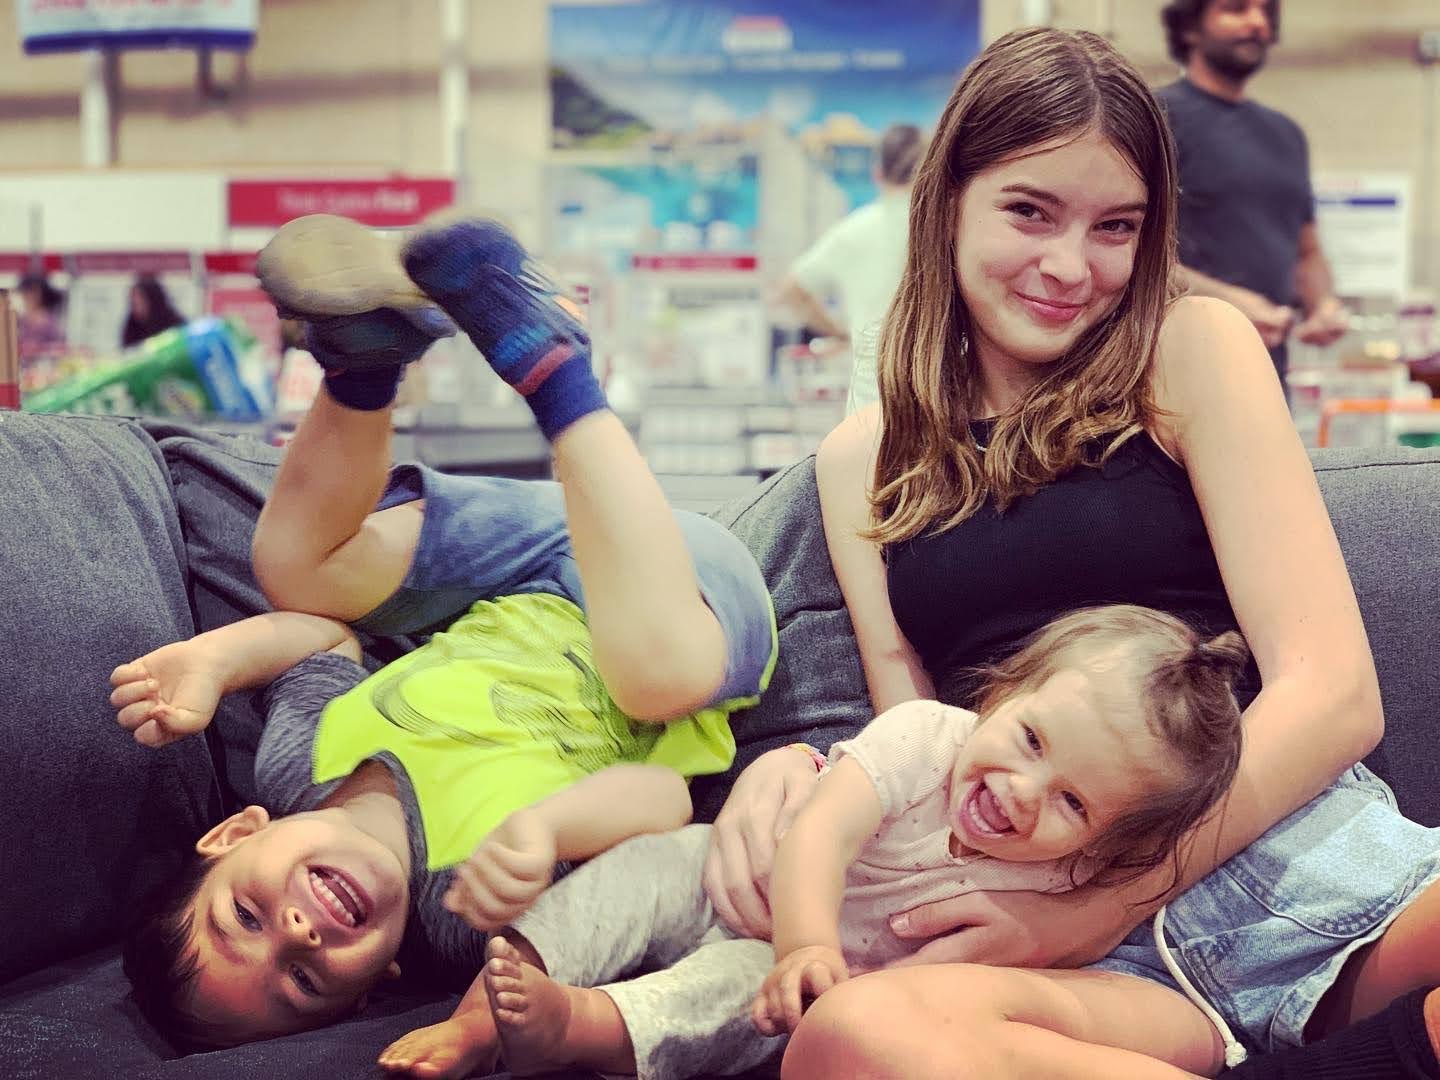 Three children pose on a couch in a Costco warehouse.